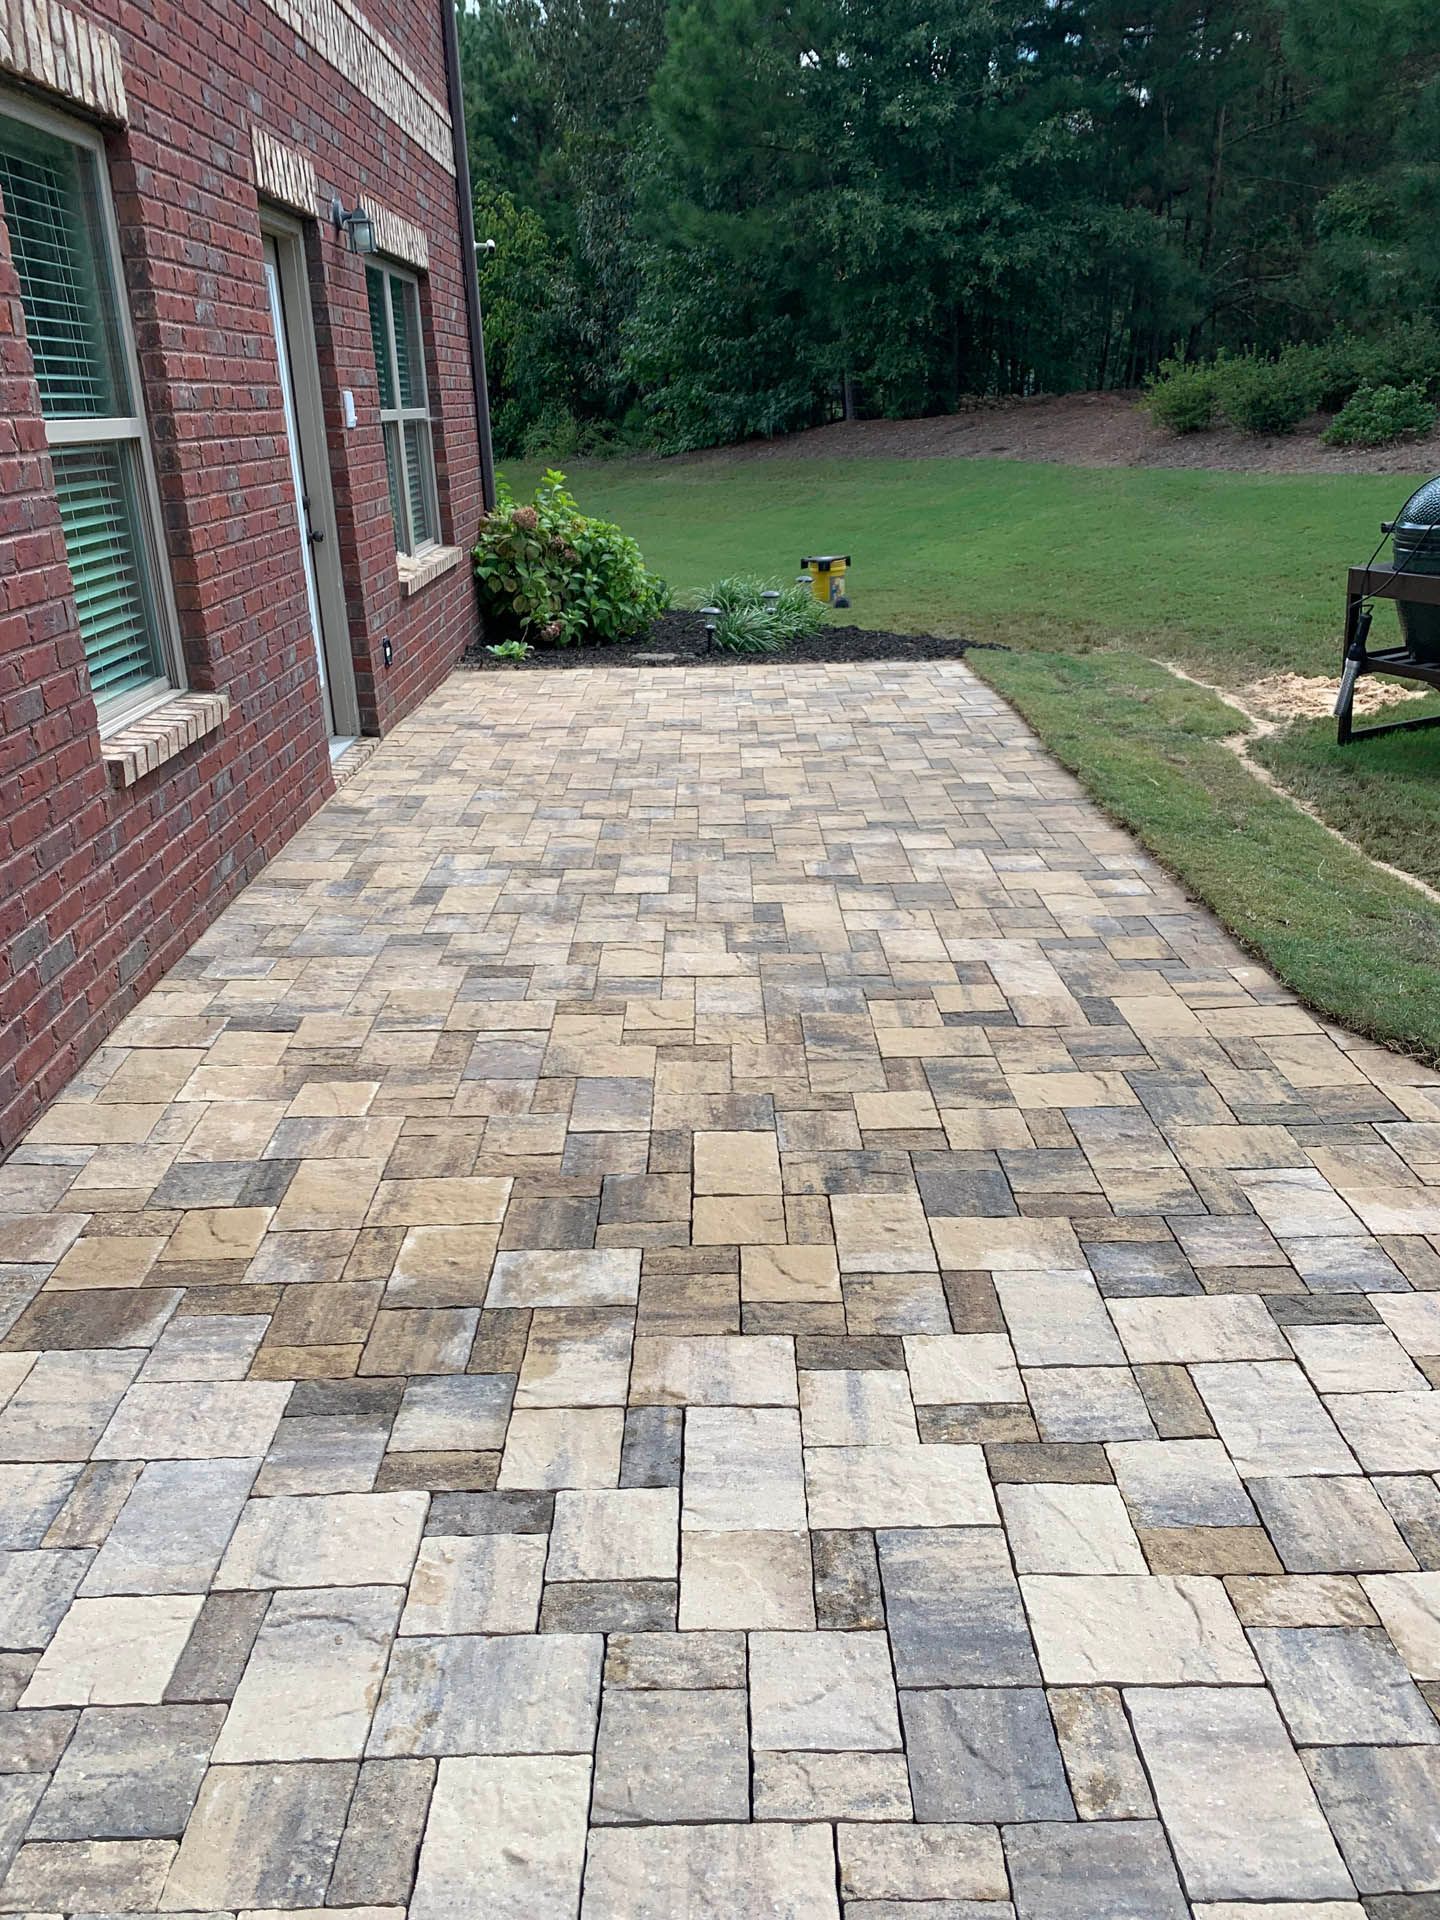 a brick walkway leading to a brick house with a grill in the backyard.